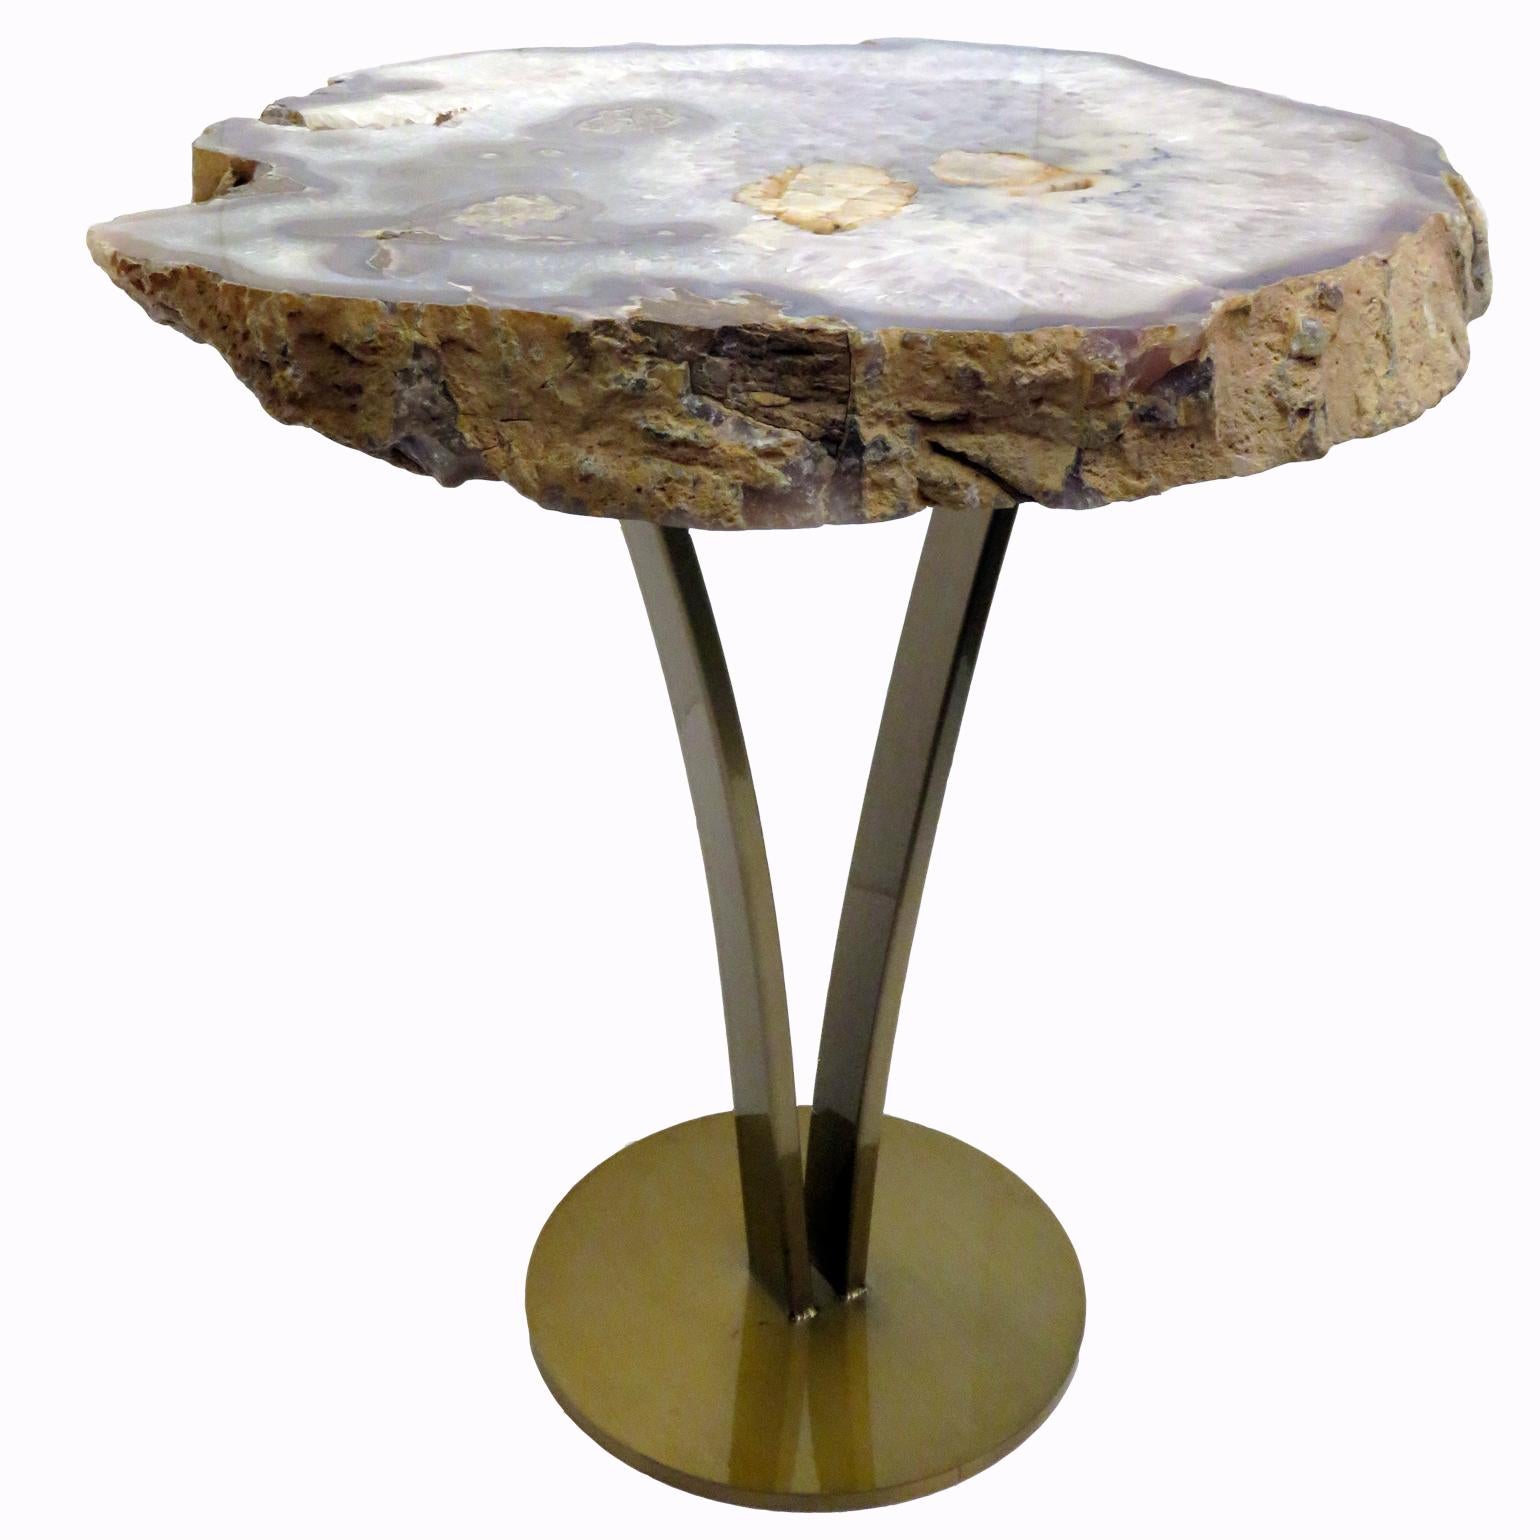 This agate slab forming a side table or cocktail table, is from Brazil and has a combination of colors with hints of blue, grey and white. Agates are formed in rounded nodules, which are sliced open to bring out the internal pattern hidden in the